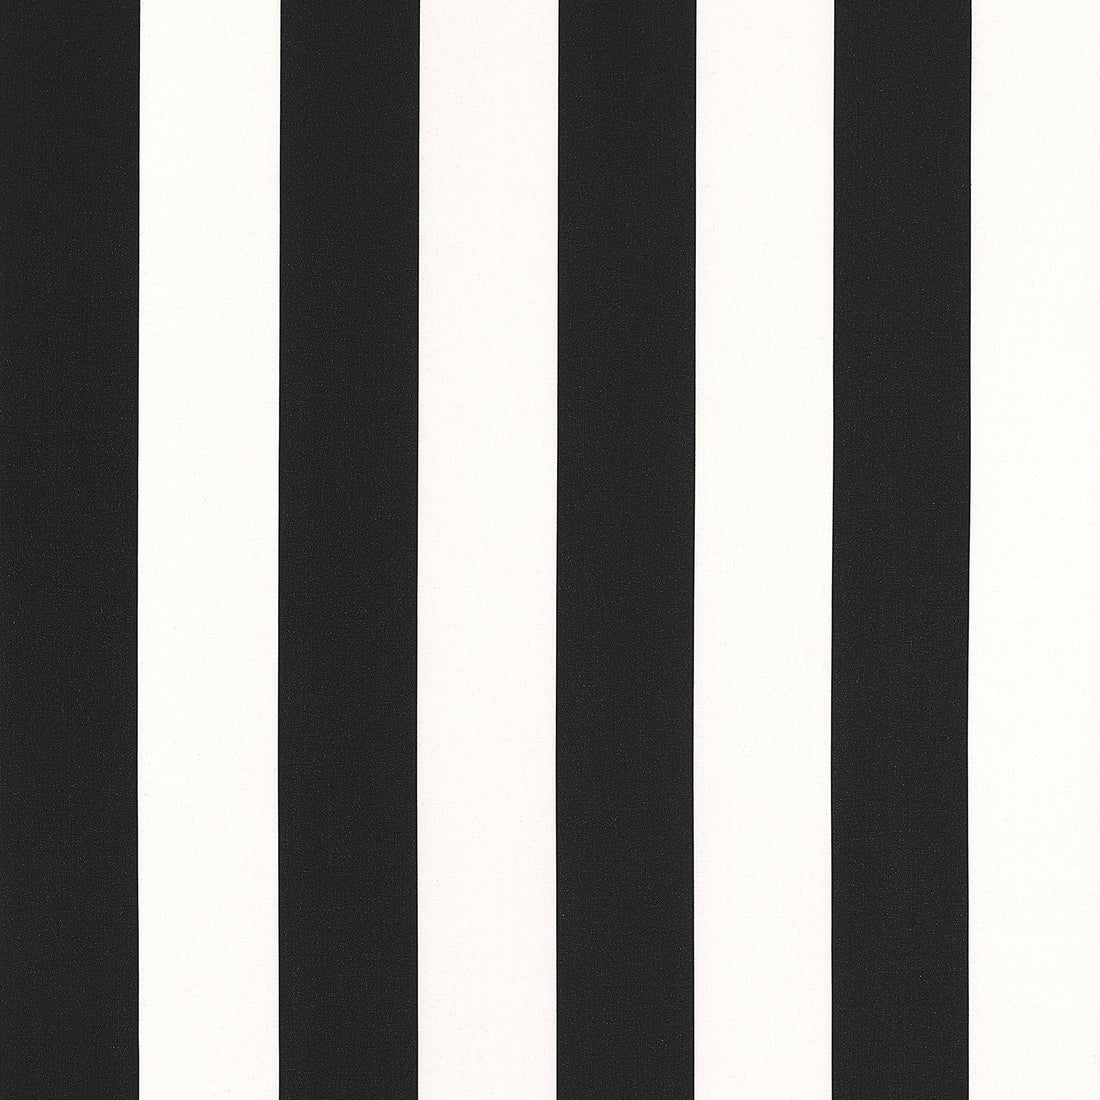 Cabana Stripe fabric in onyx color - pattern number W81638 - by Thibaut in the Locale collection